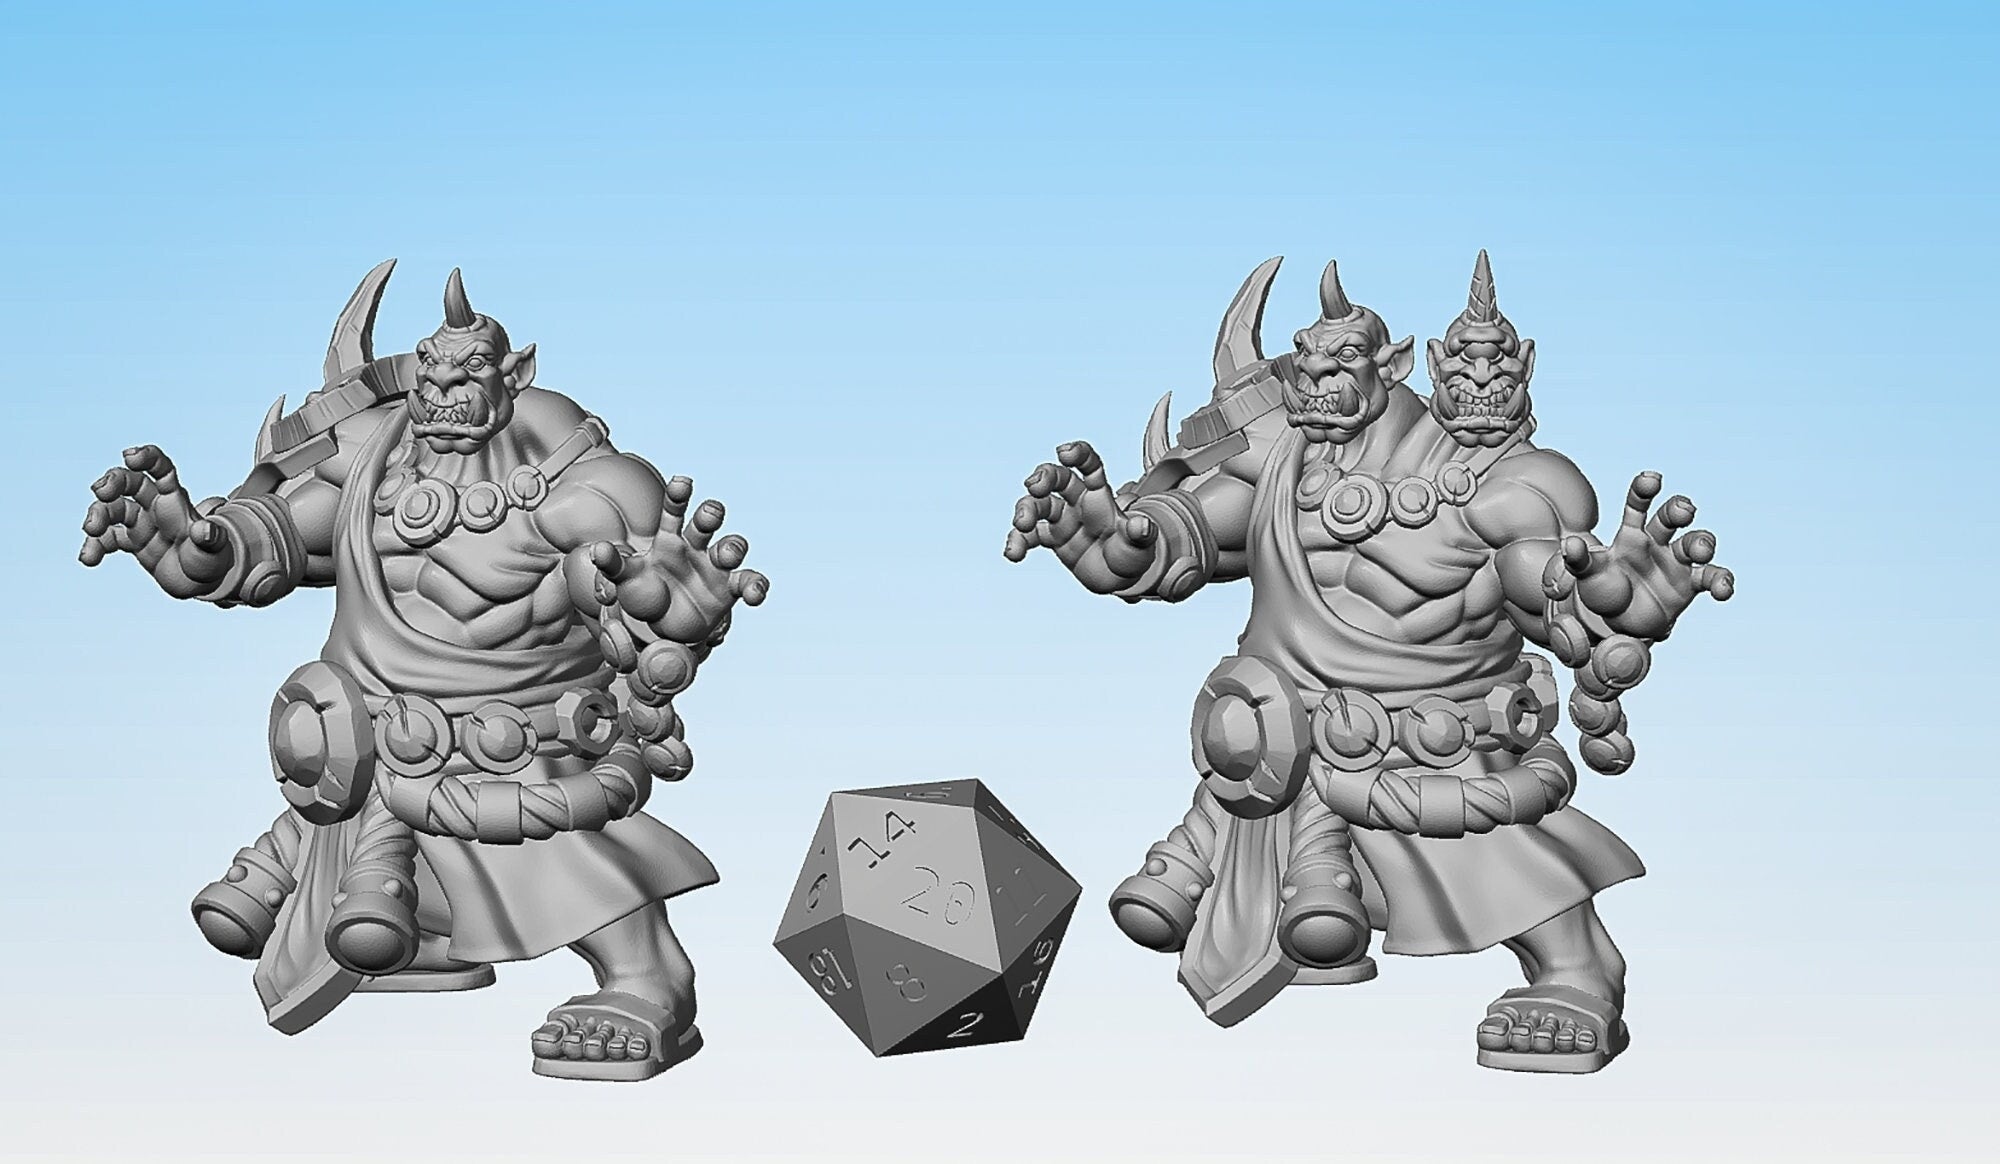 OGRE "Mage" 1 or 2 Heads | Dungeons and Dragons | DnD | Pathfinder | Tabletop | RPG | Hero Size | 28 mm-Role Playing Miniatures